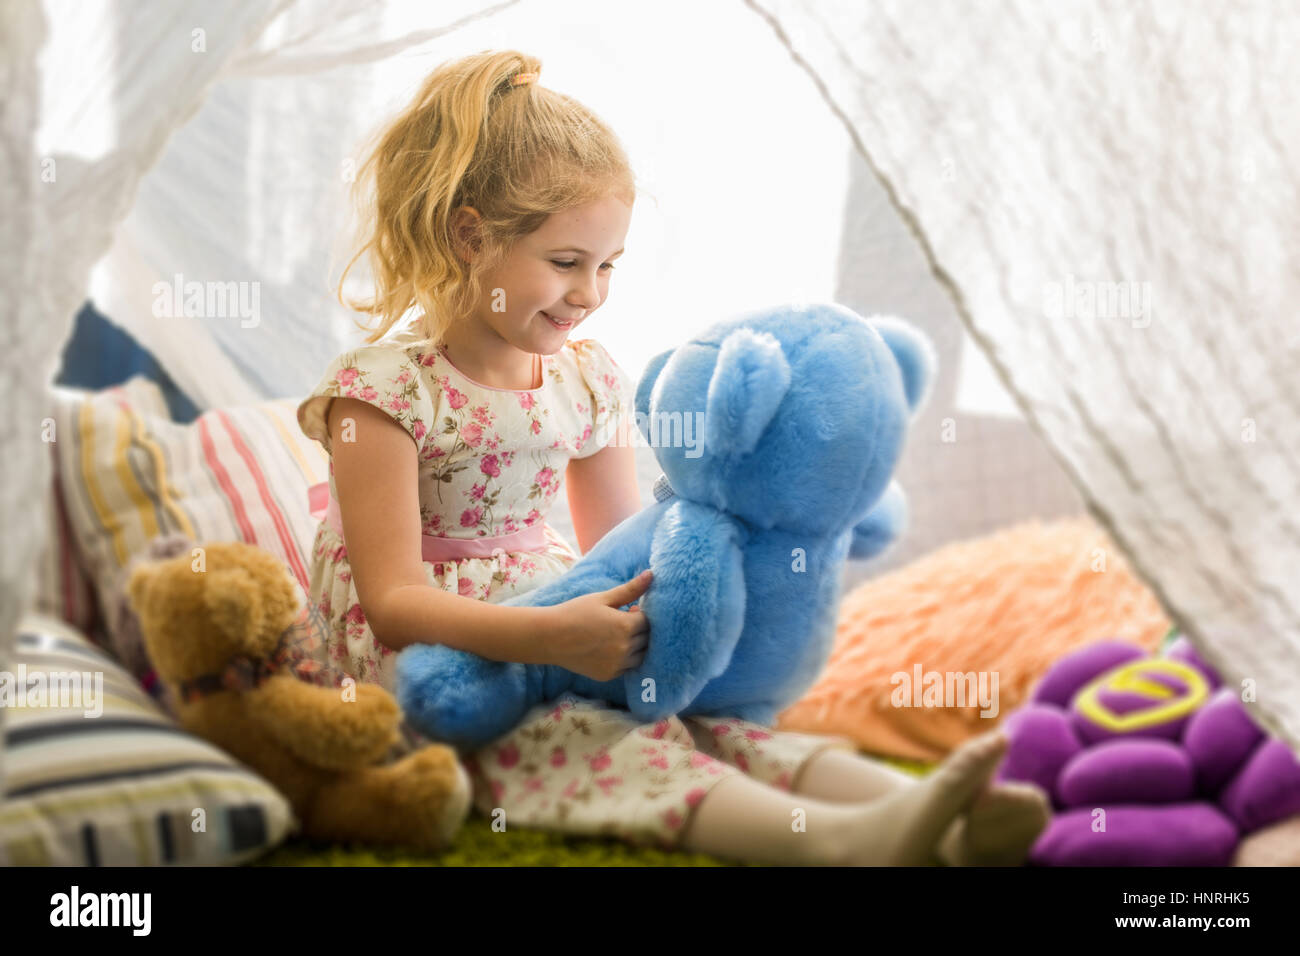 Little blonde child girl playing at home in her room with teddy bears Stock Photo